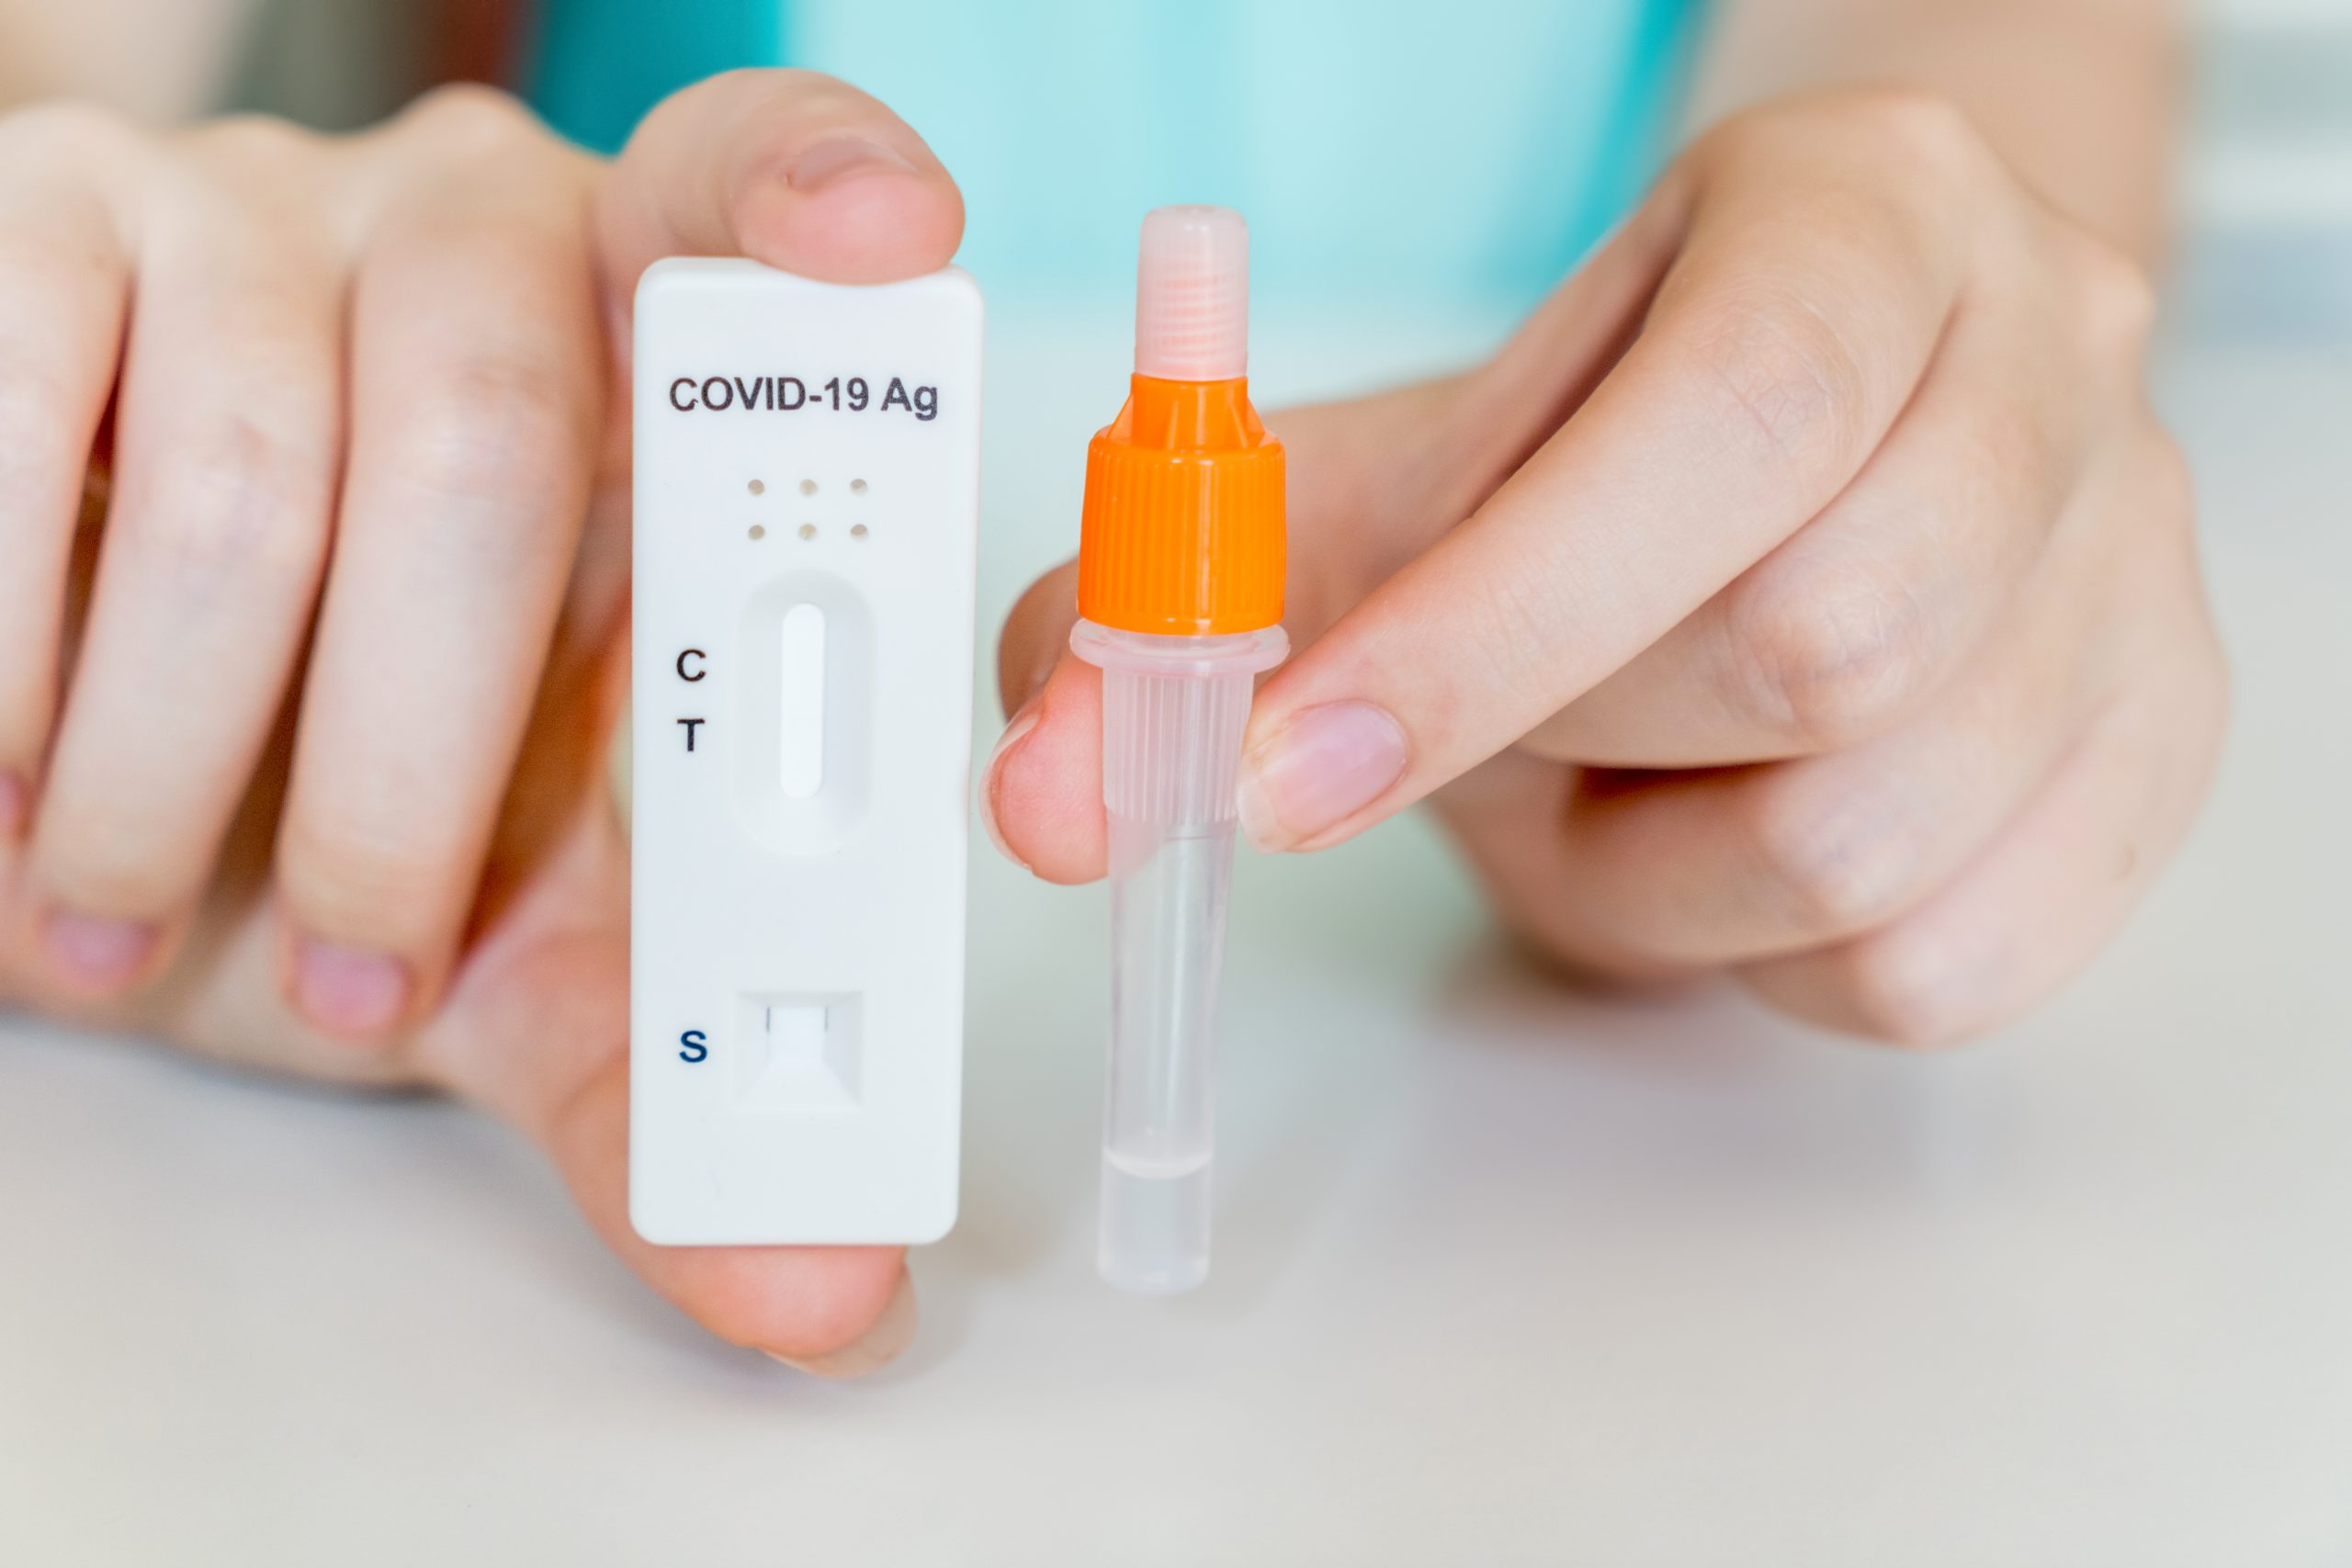 7 tips to properly conduct a home Coronavirus test